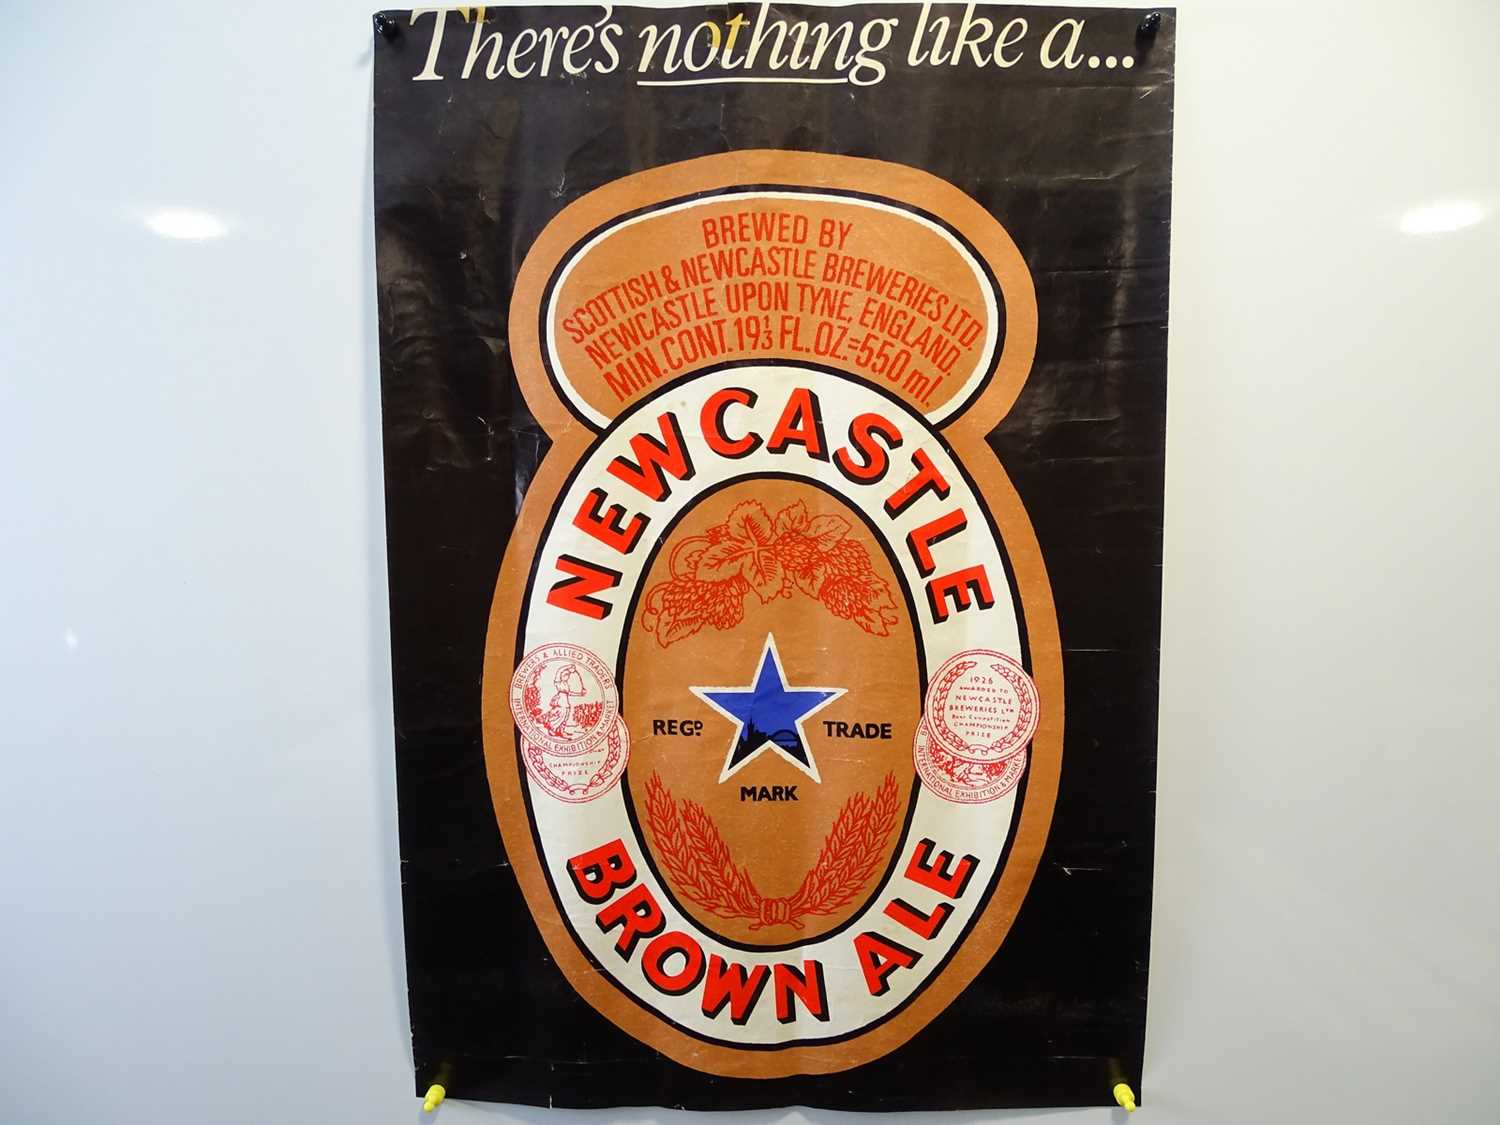 Lot 93 - NEWCASTLE BROWN ALE - 'There's nothing like a...